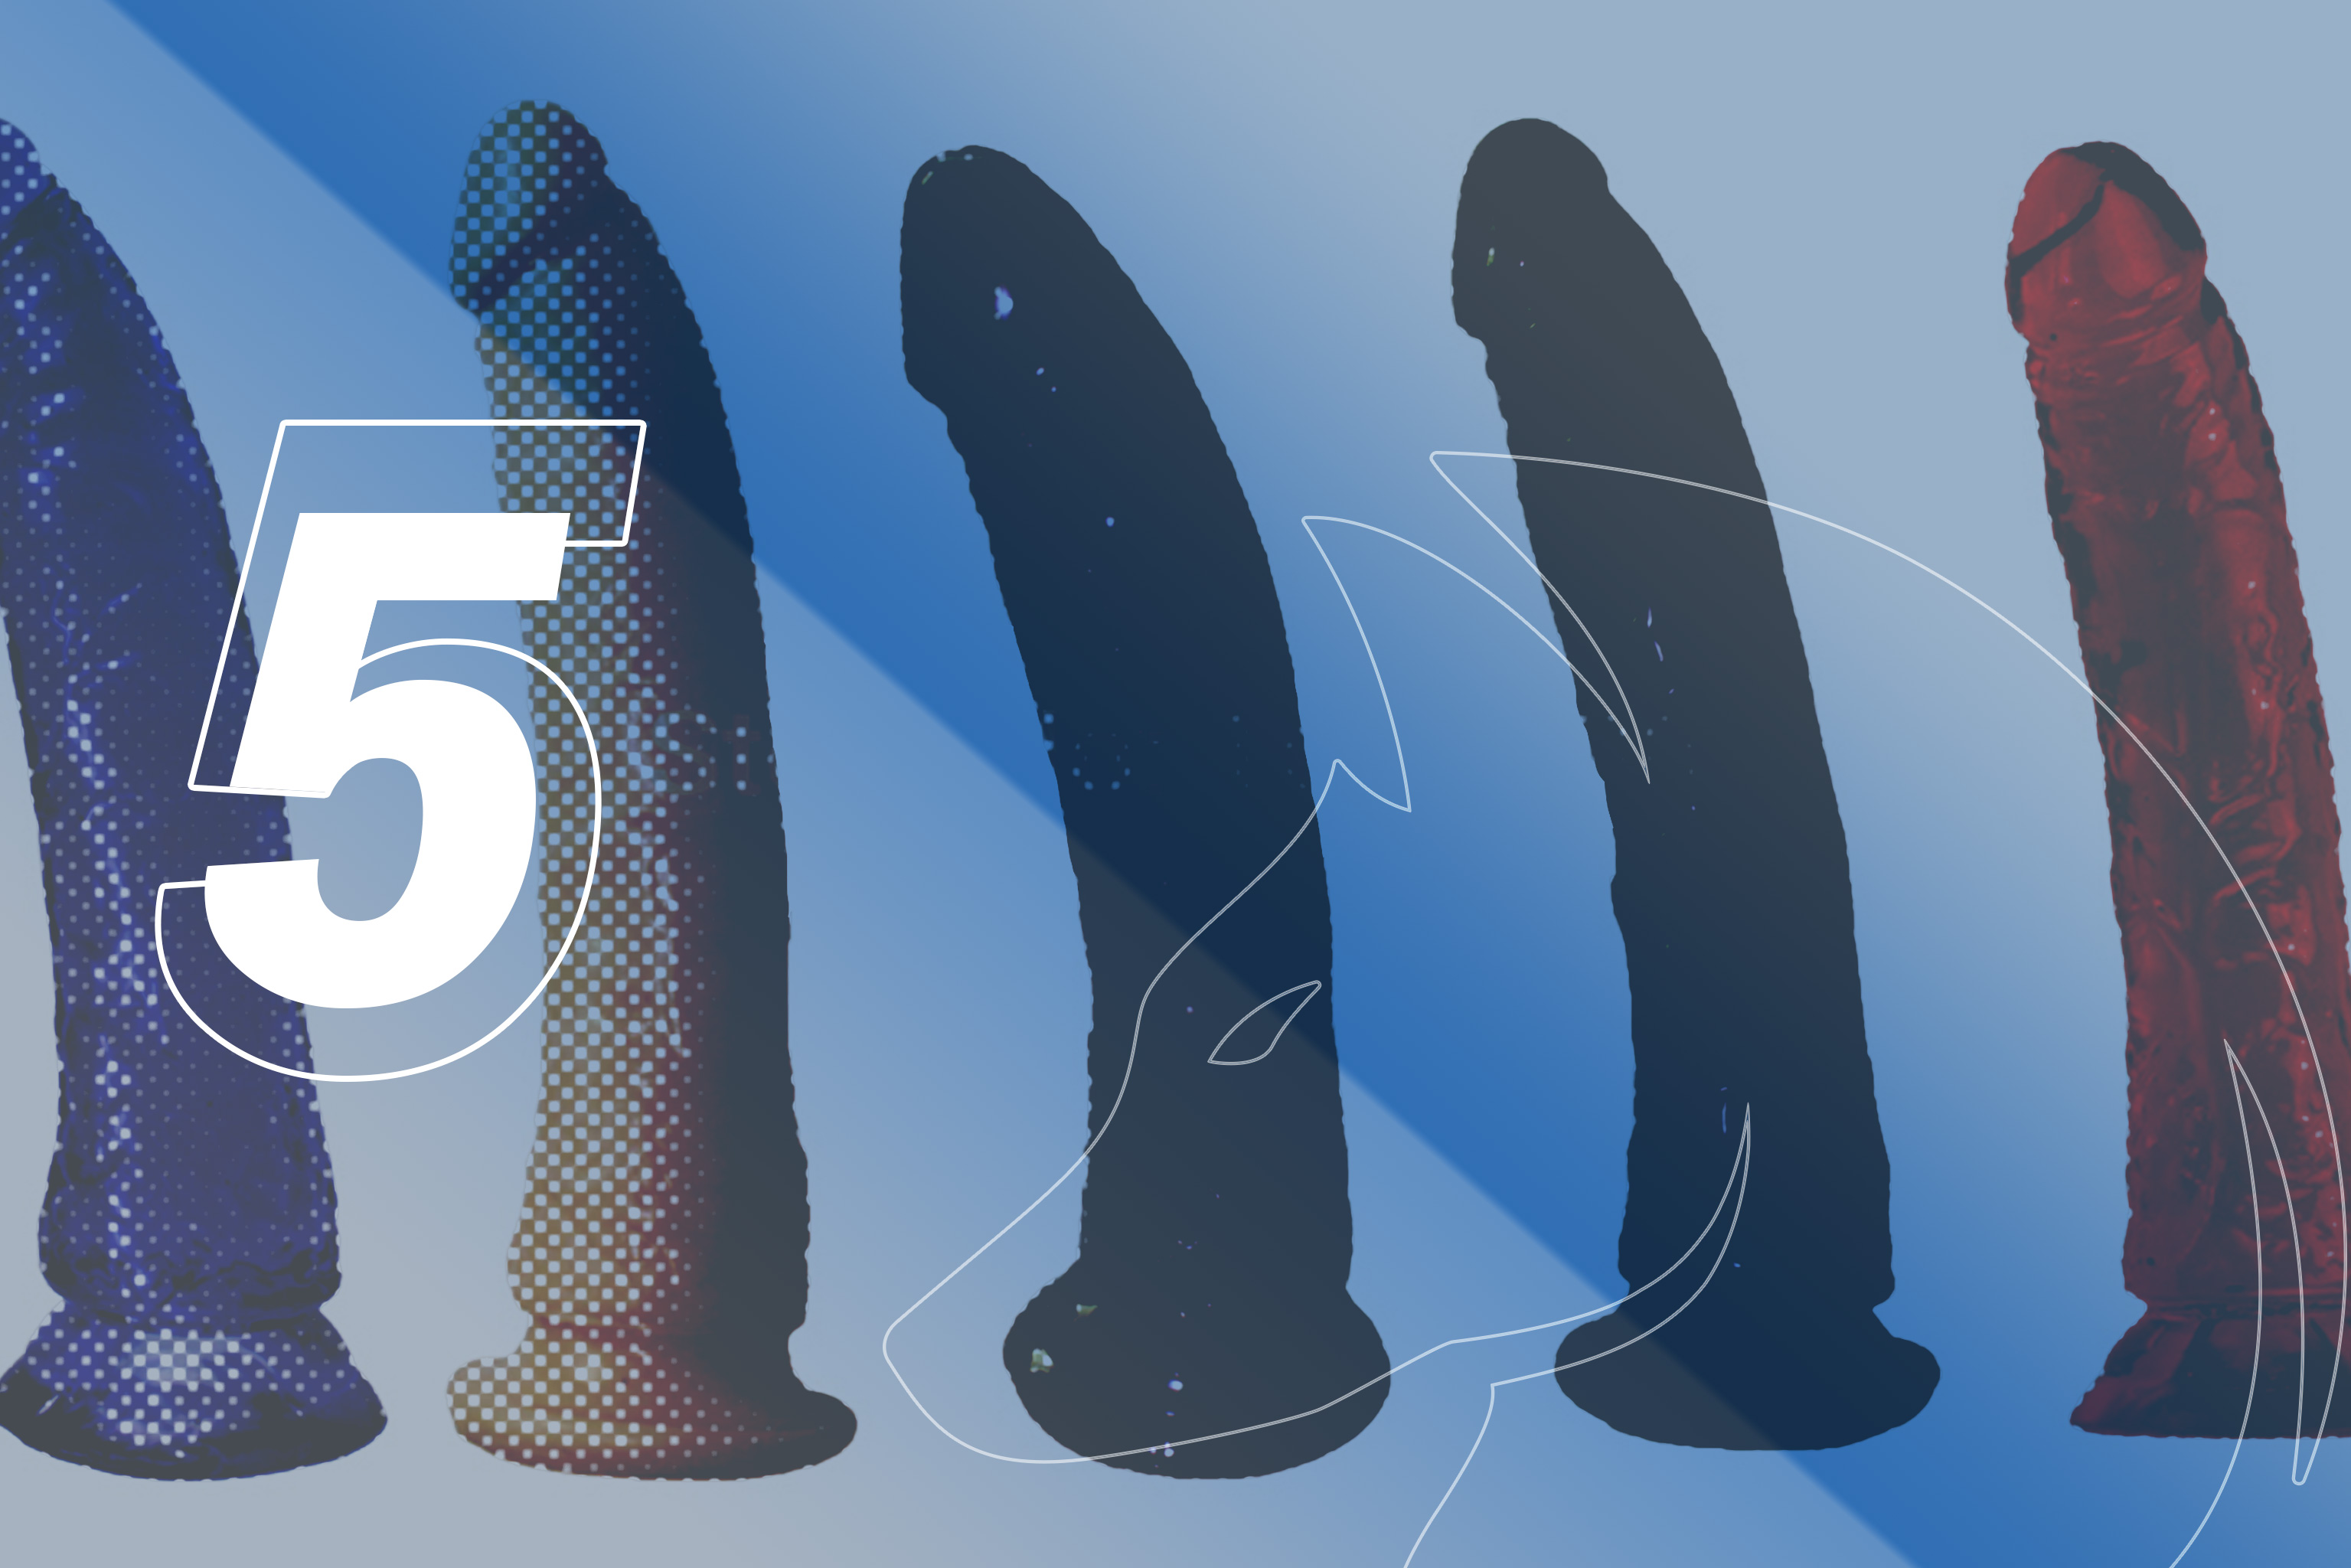 5 dildos, Penises, Links, 5 For the Weekend